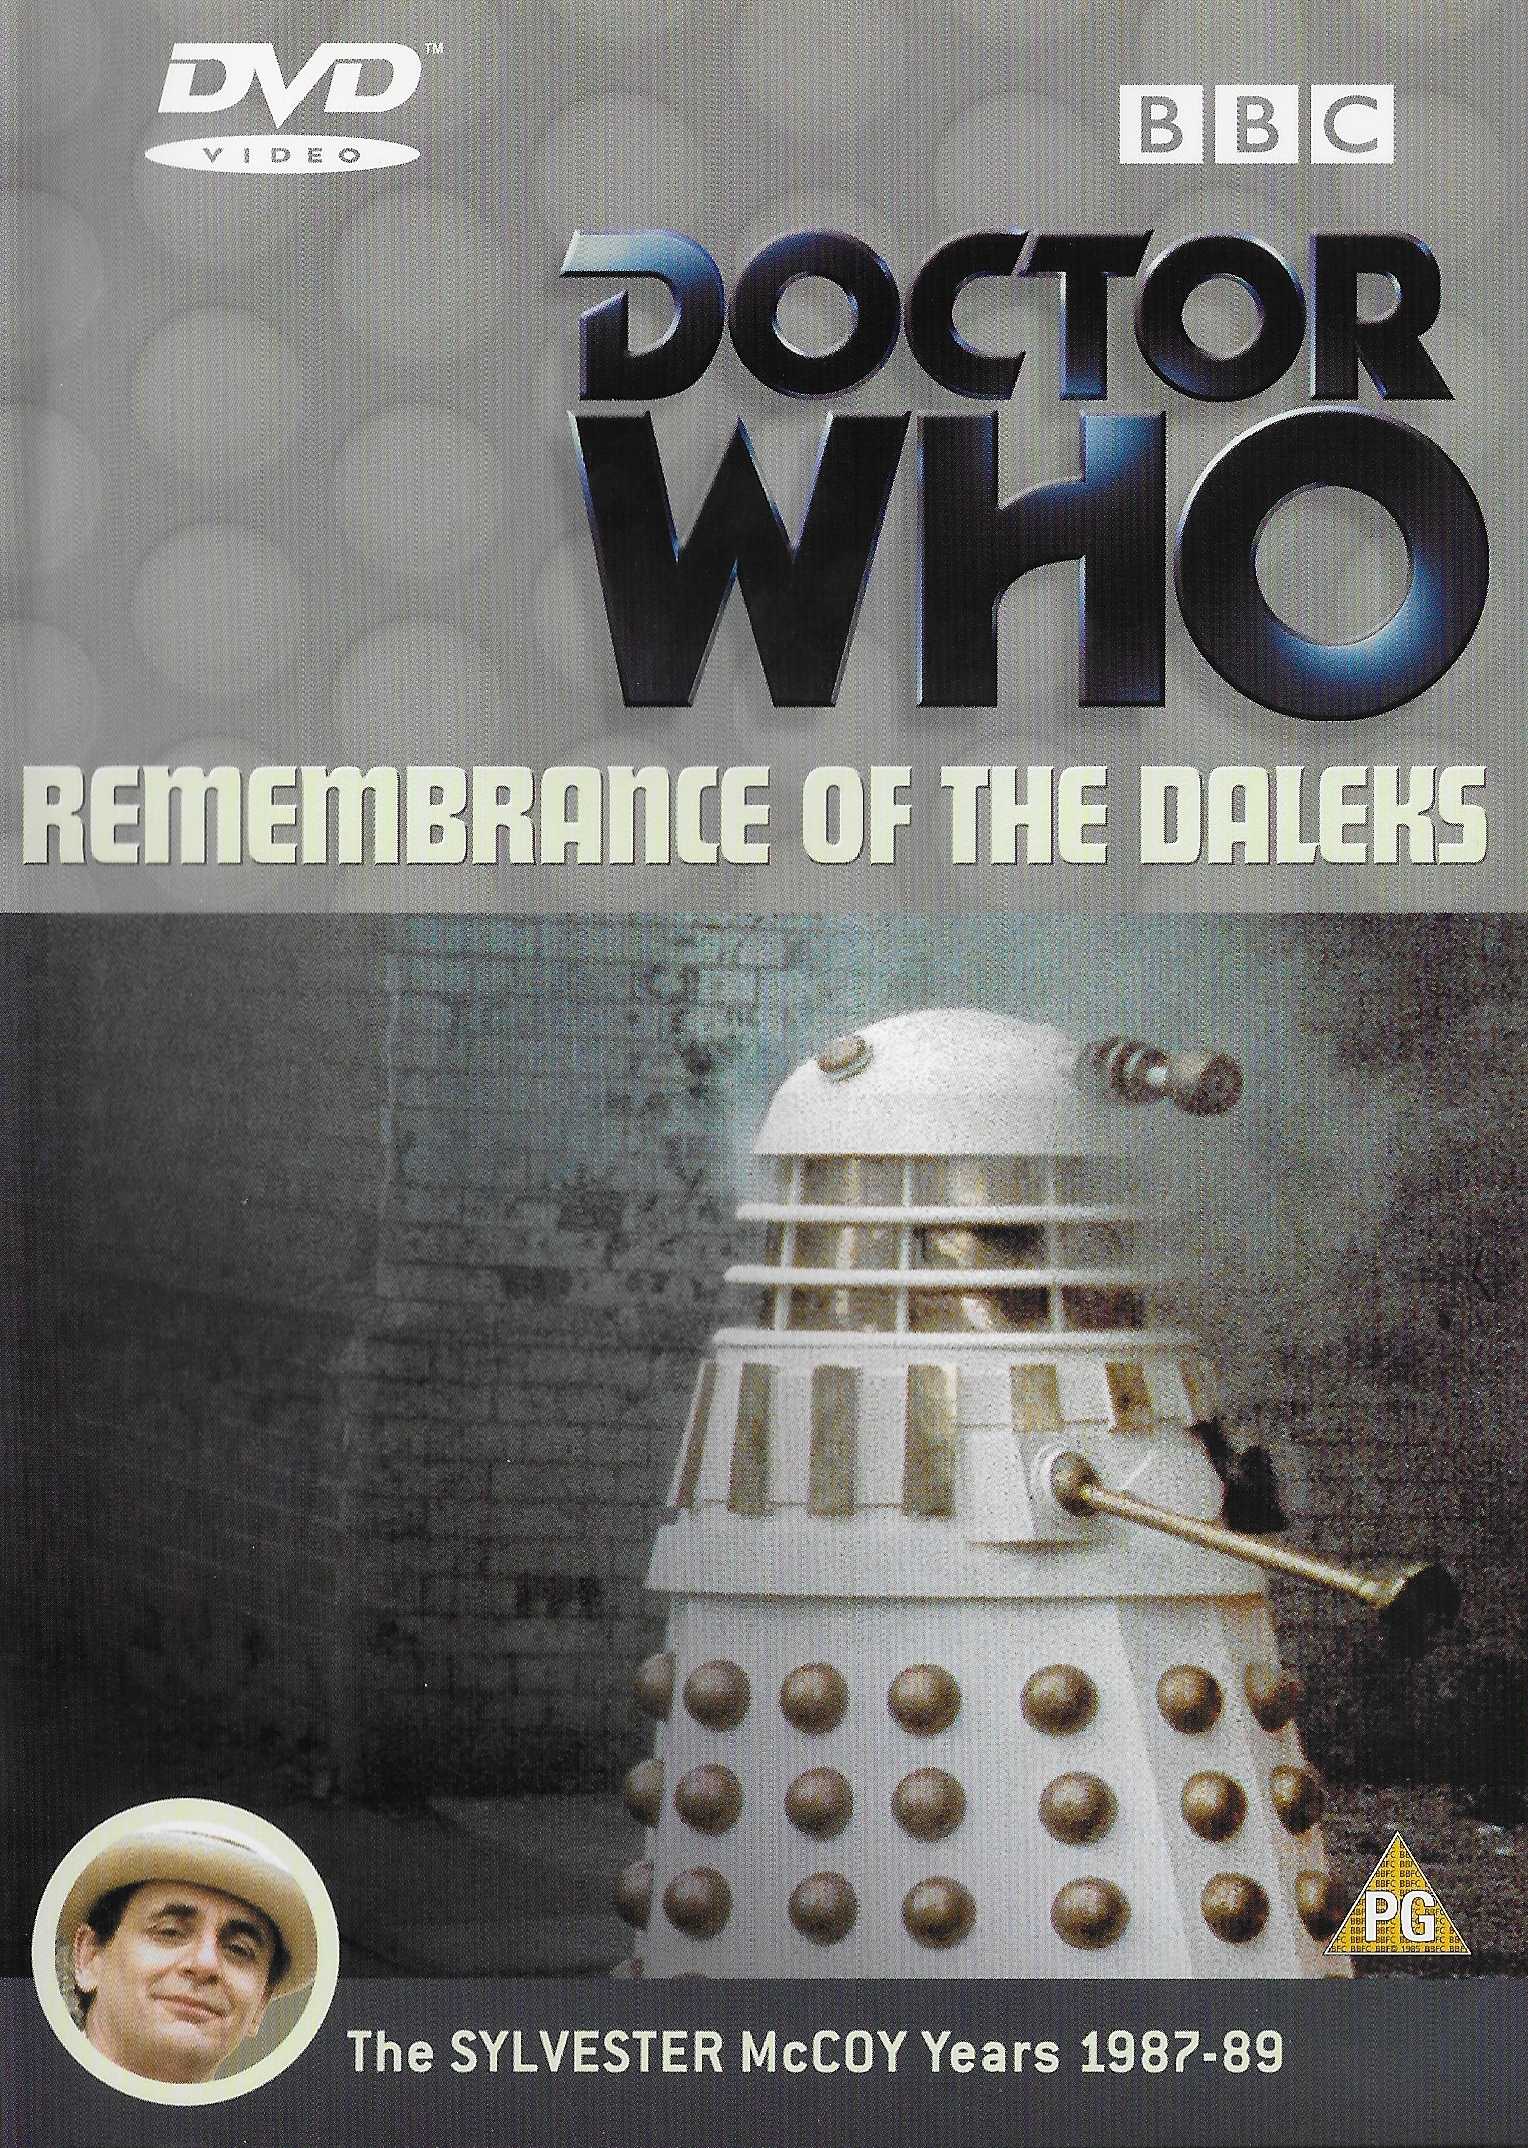 Picture of BBCDVD 1040 Doctor Who - Remembrance of the Daleks by artist Ben Aaronovitch from the BBC records and Tapes library